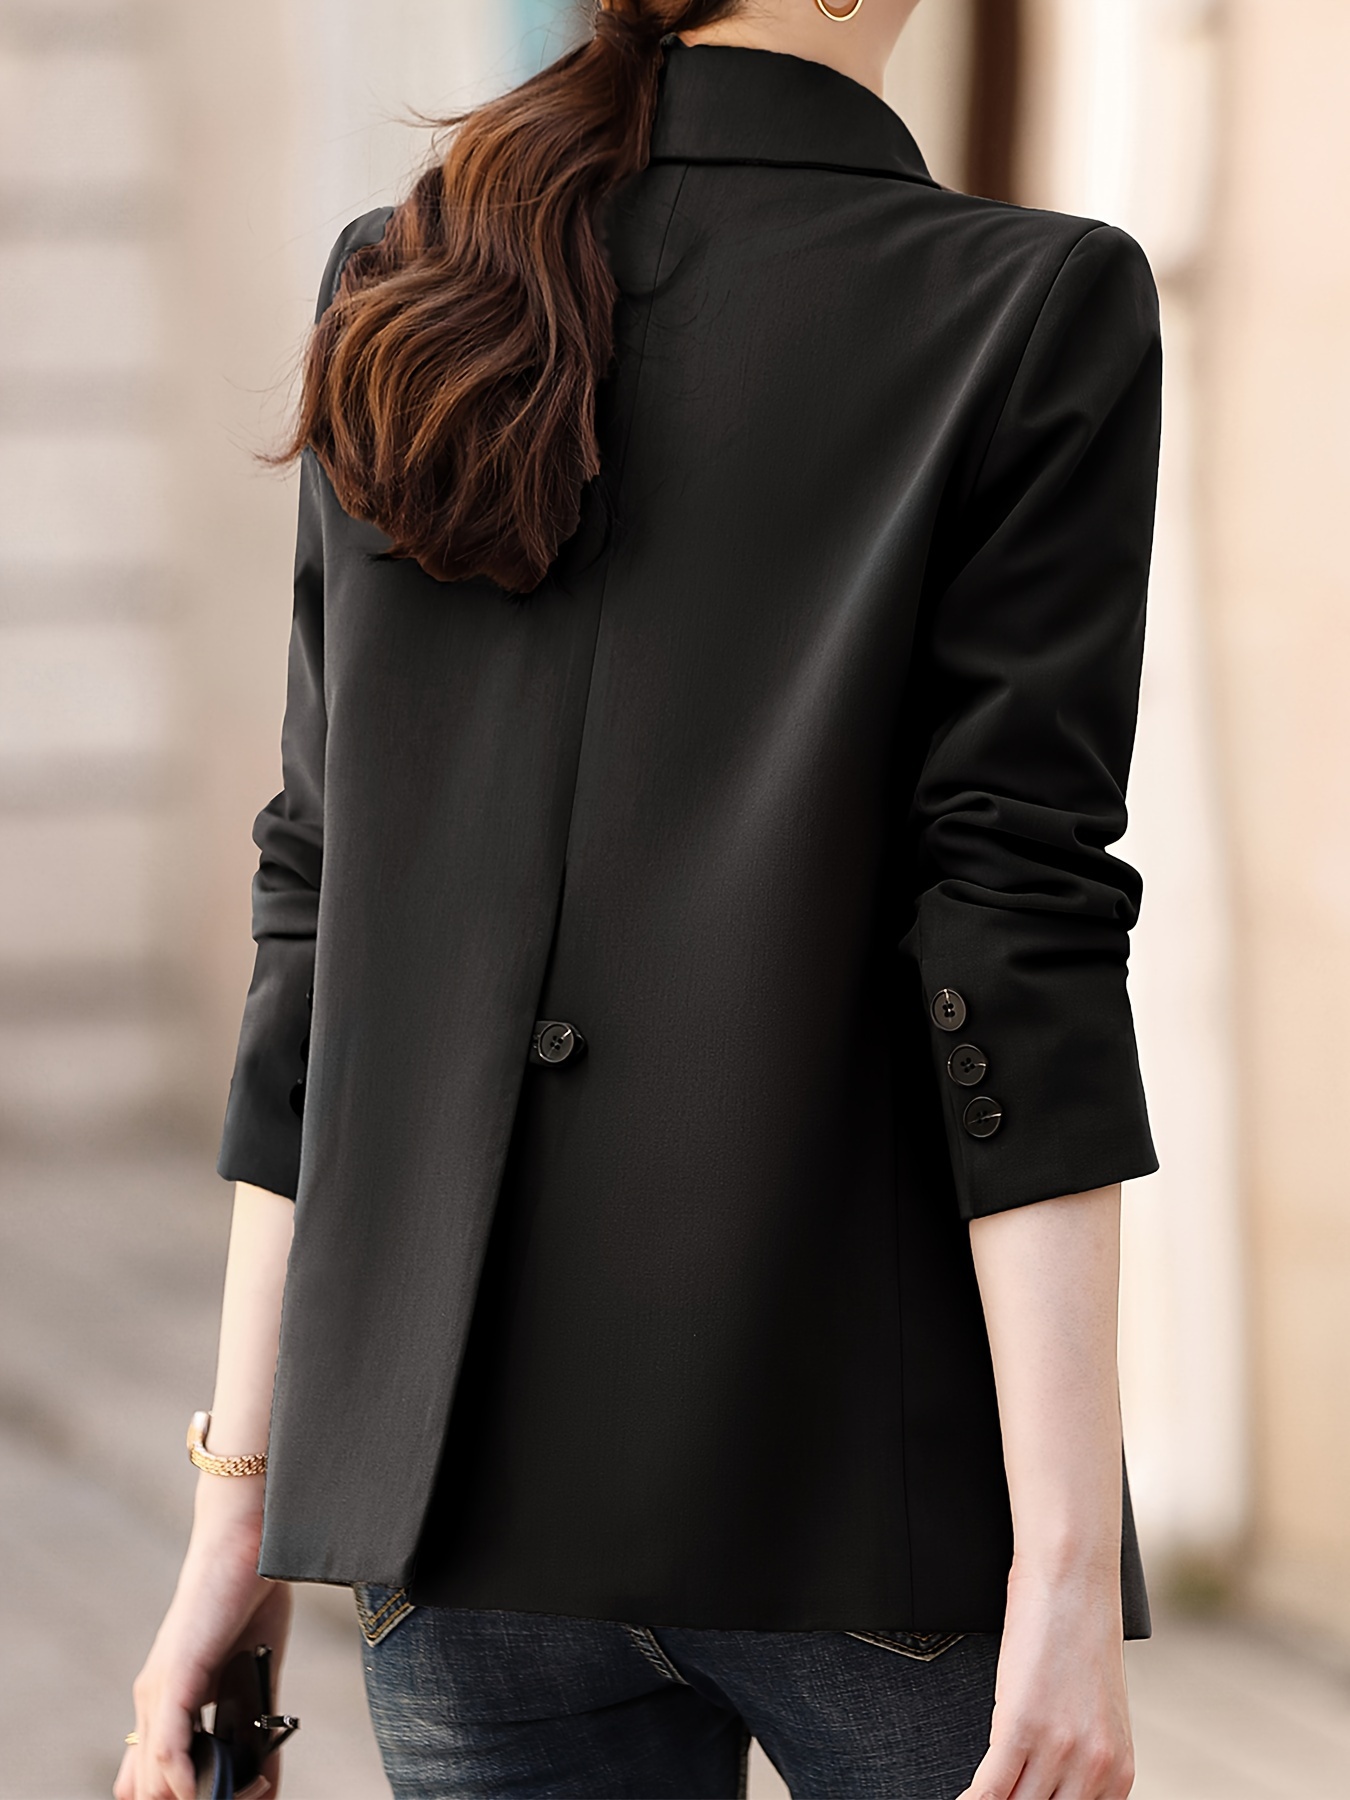 Single Breasted Lapel Neck Blazer, Casual Solid Long Sleeve Blazer For Office & Work, Women s Clothing details 5